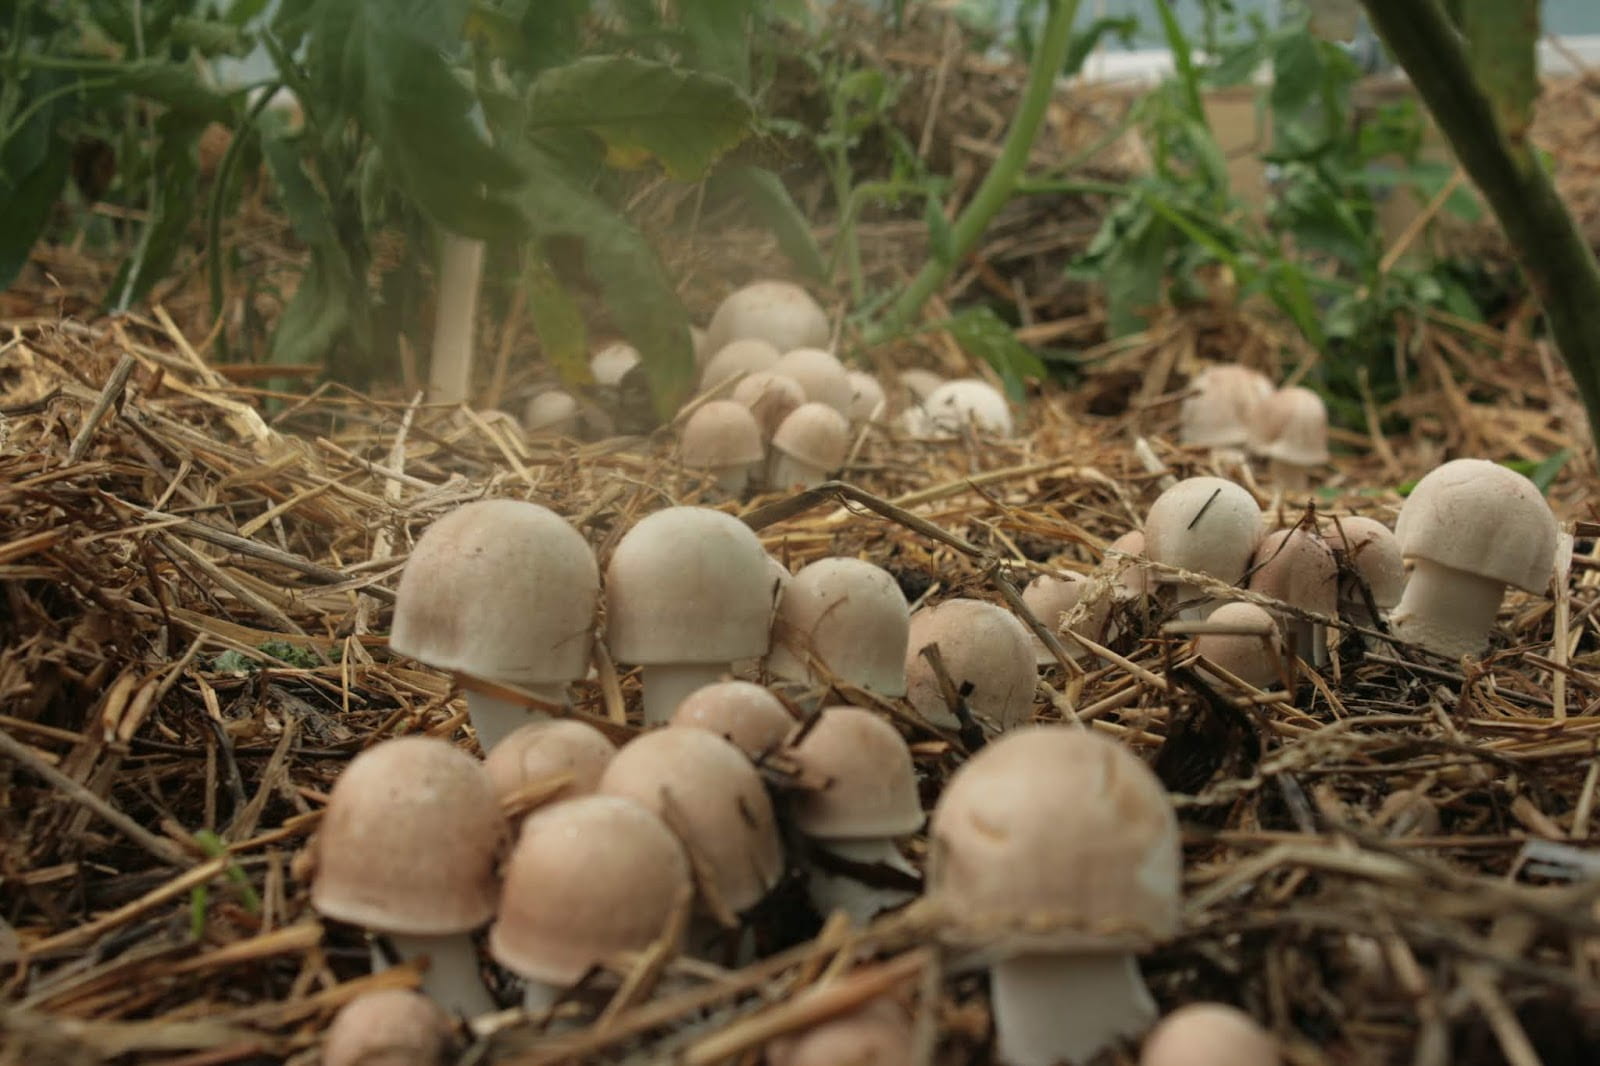 baby mushrooms emerge in a bed of straw